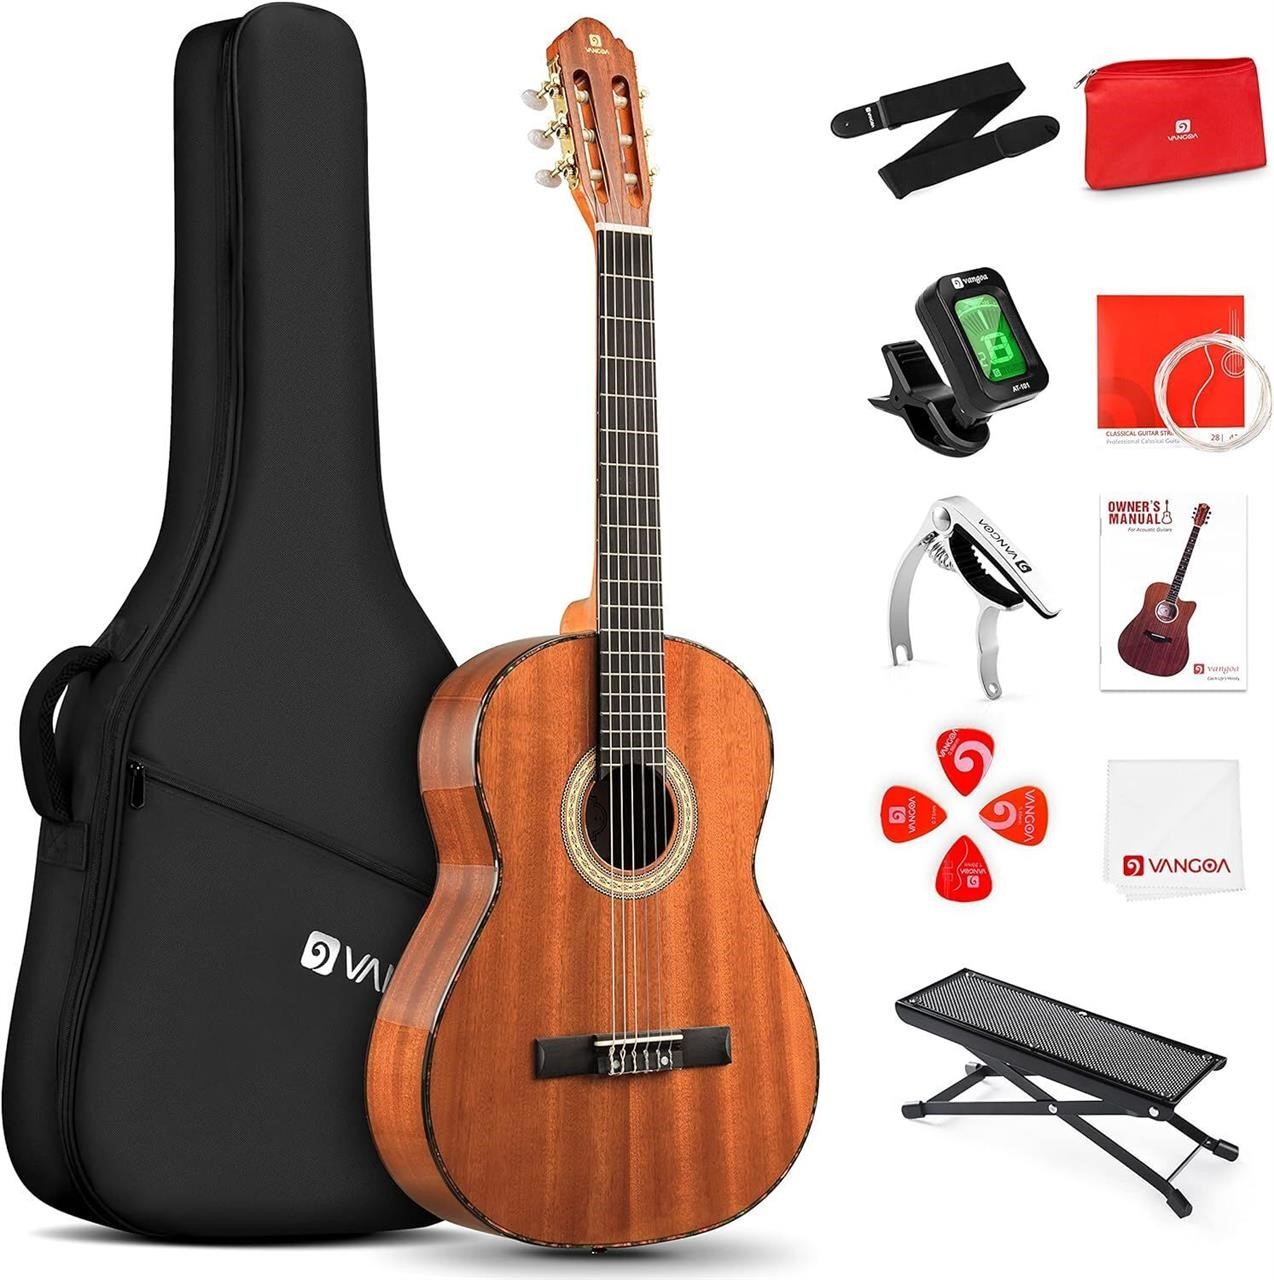 NEW $230 Classical Guitar 4/4, 39 Inch